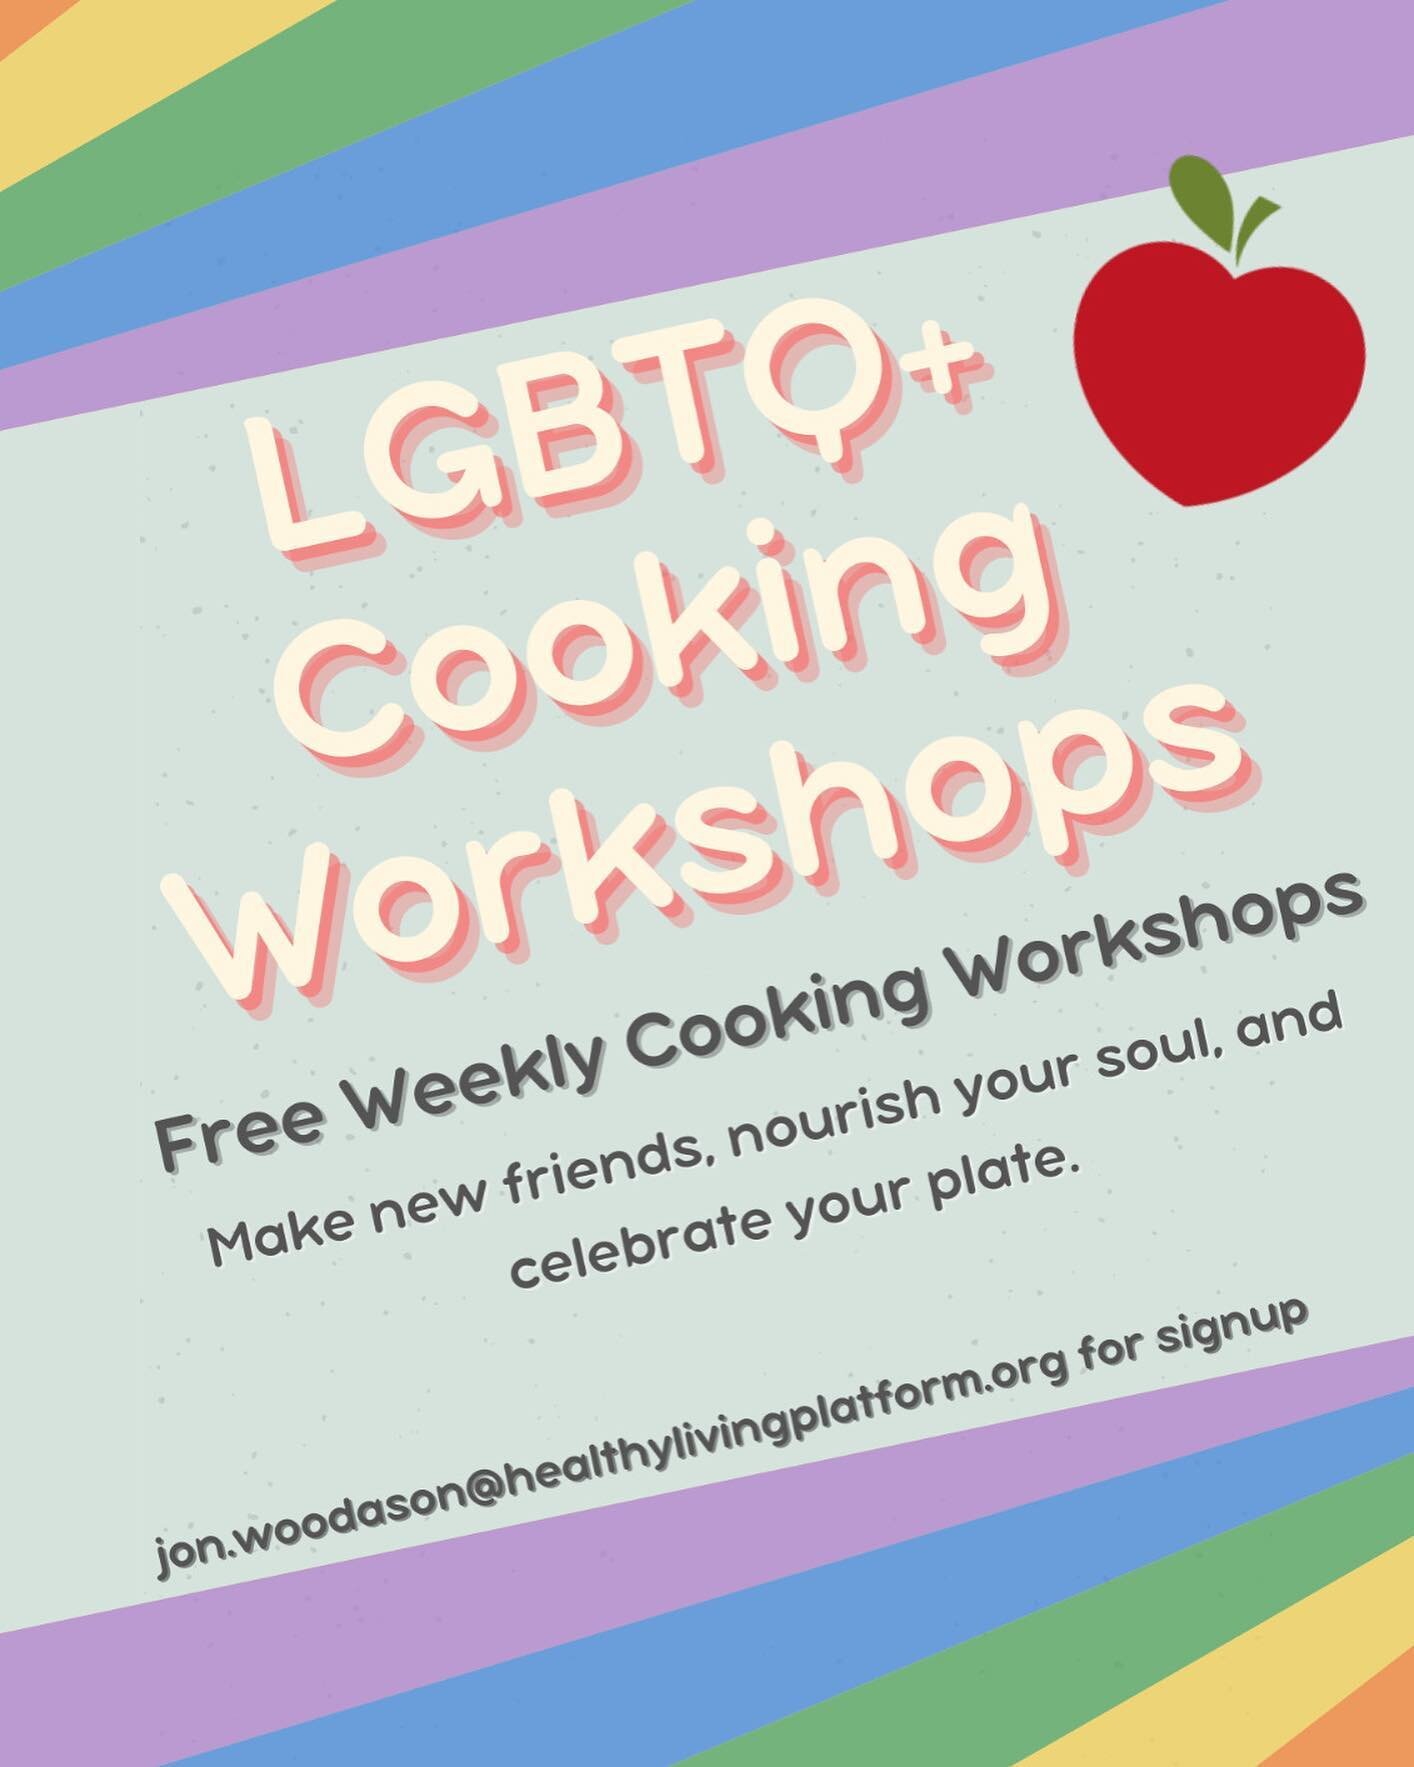 Do you love to cook &amp; want to connect with your community?
 
The Healthy Living Platform is launching a brand-new LGBT Food Ambassadors program! This exciting initiative will help you:
&bull;	Master essential cooking skills
&bull;	Explore sustain